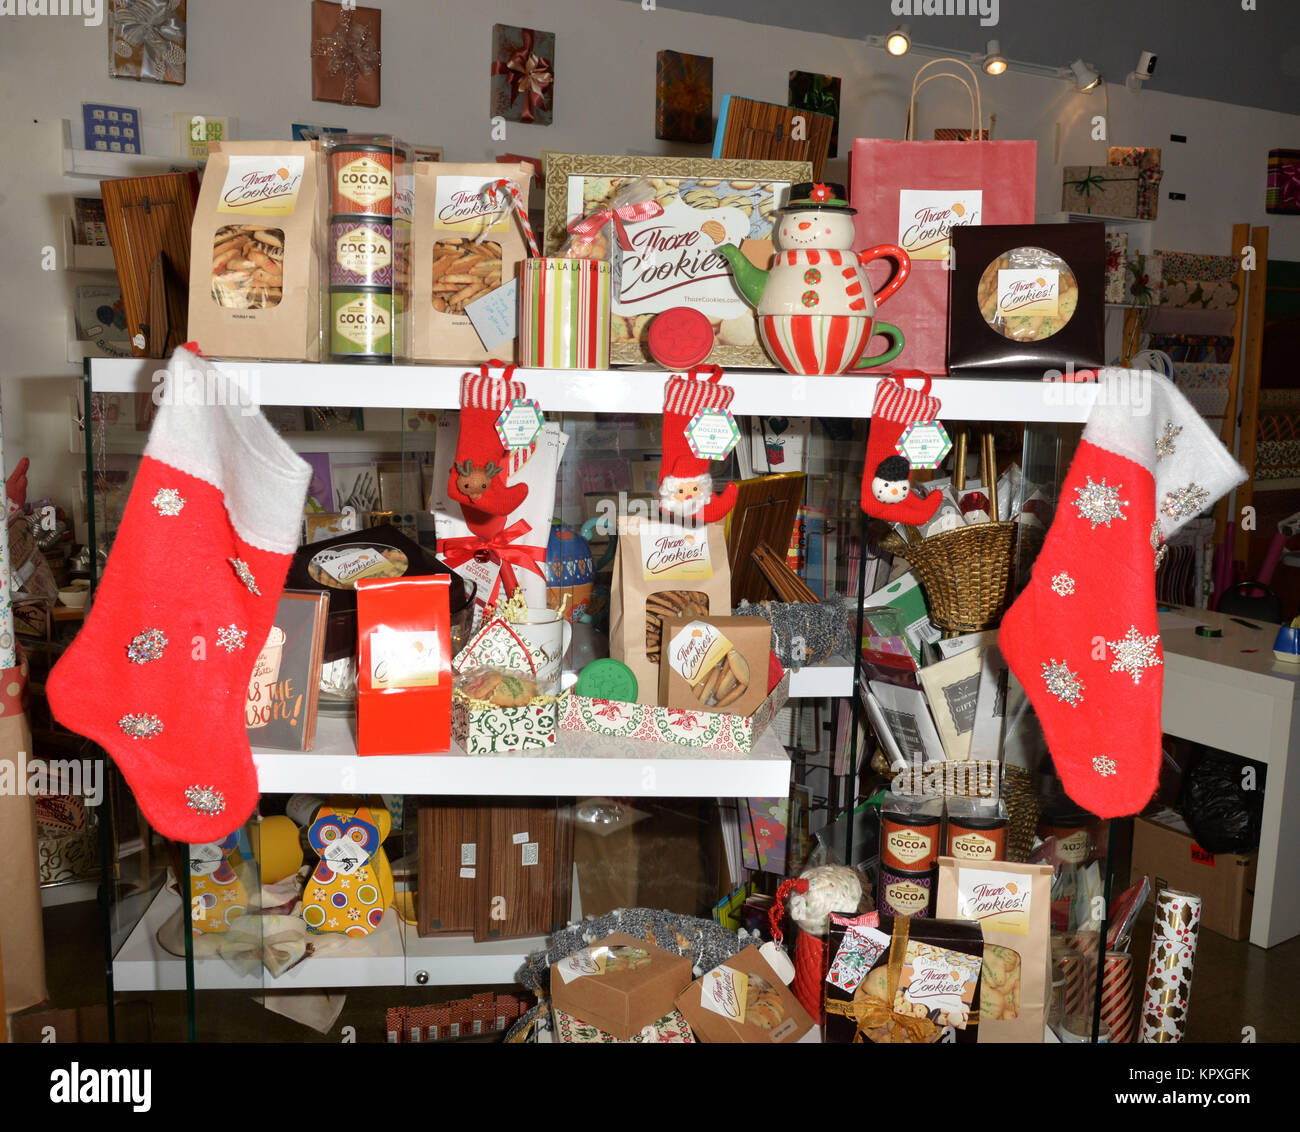 Los Angeles, Ca, USA. 16th Dec, 2017. 'Thoze Cookies!' Company Pop Up at Cordially Invited in Los Angeles, California on December 16, 2017 Credit: Koi Sojer/Snap'n U Photos/Media Punch/Alamy Live News Stock Photo